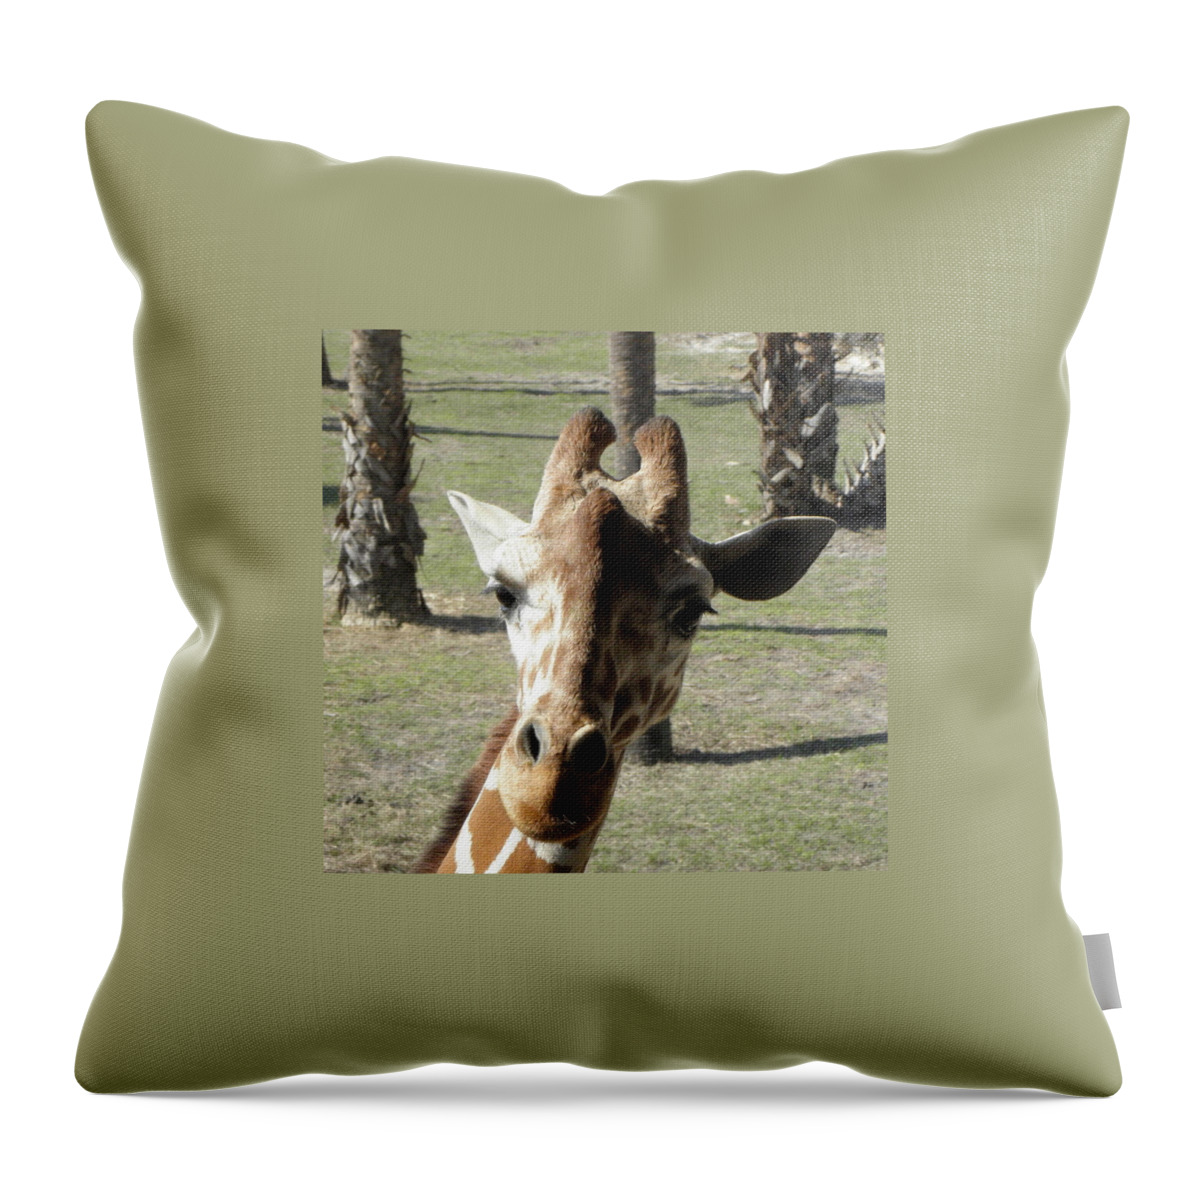 Giraffe Throw Pillow featuring the photograph What Are You Looking At by Kim Galluzzo Wozniak